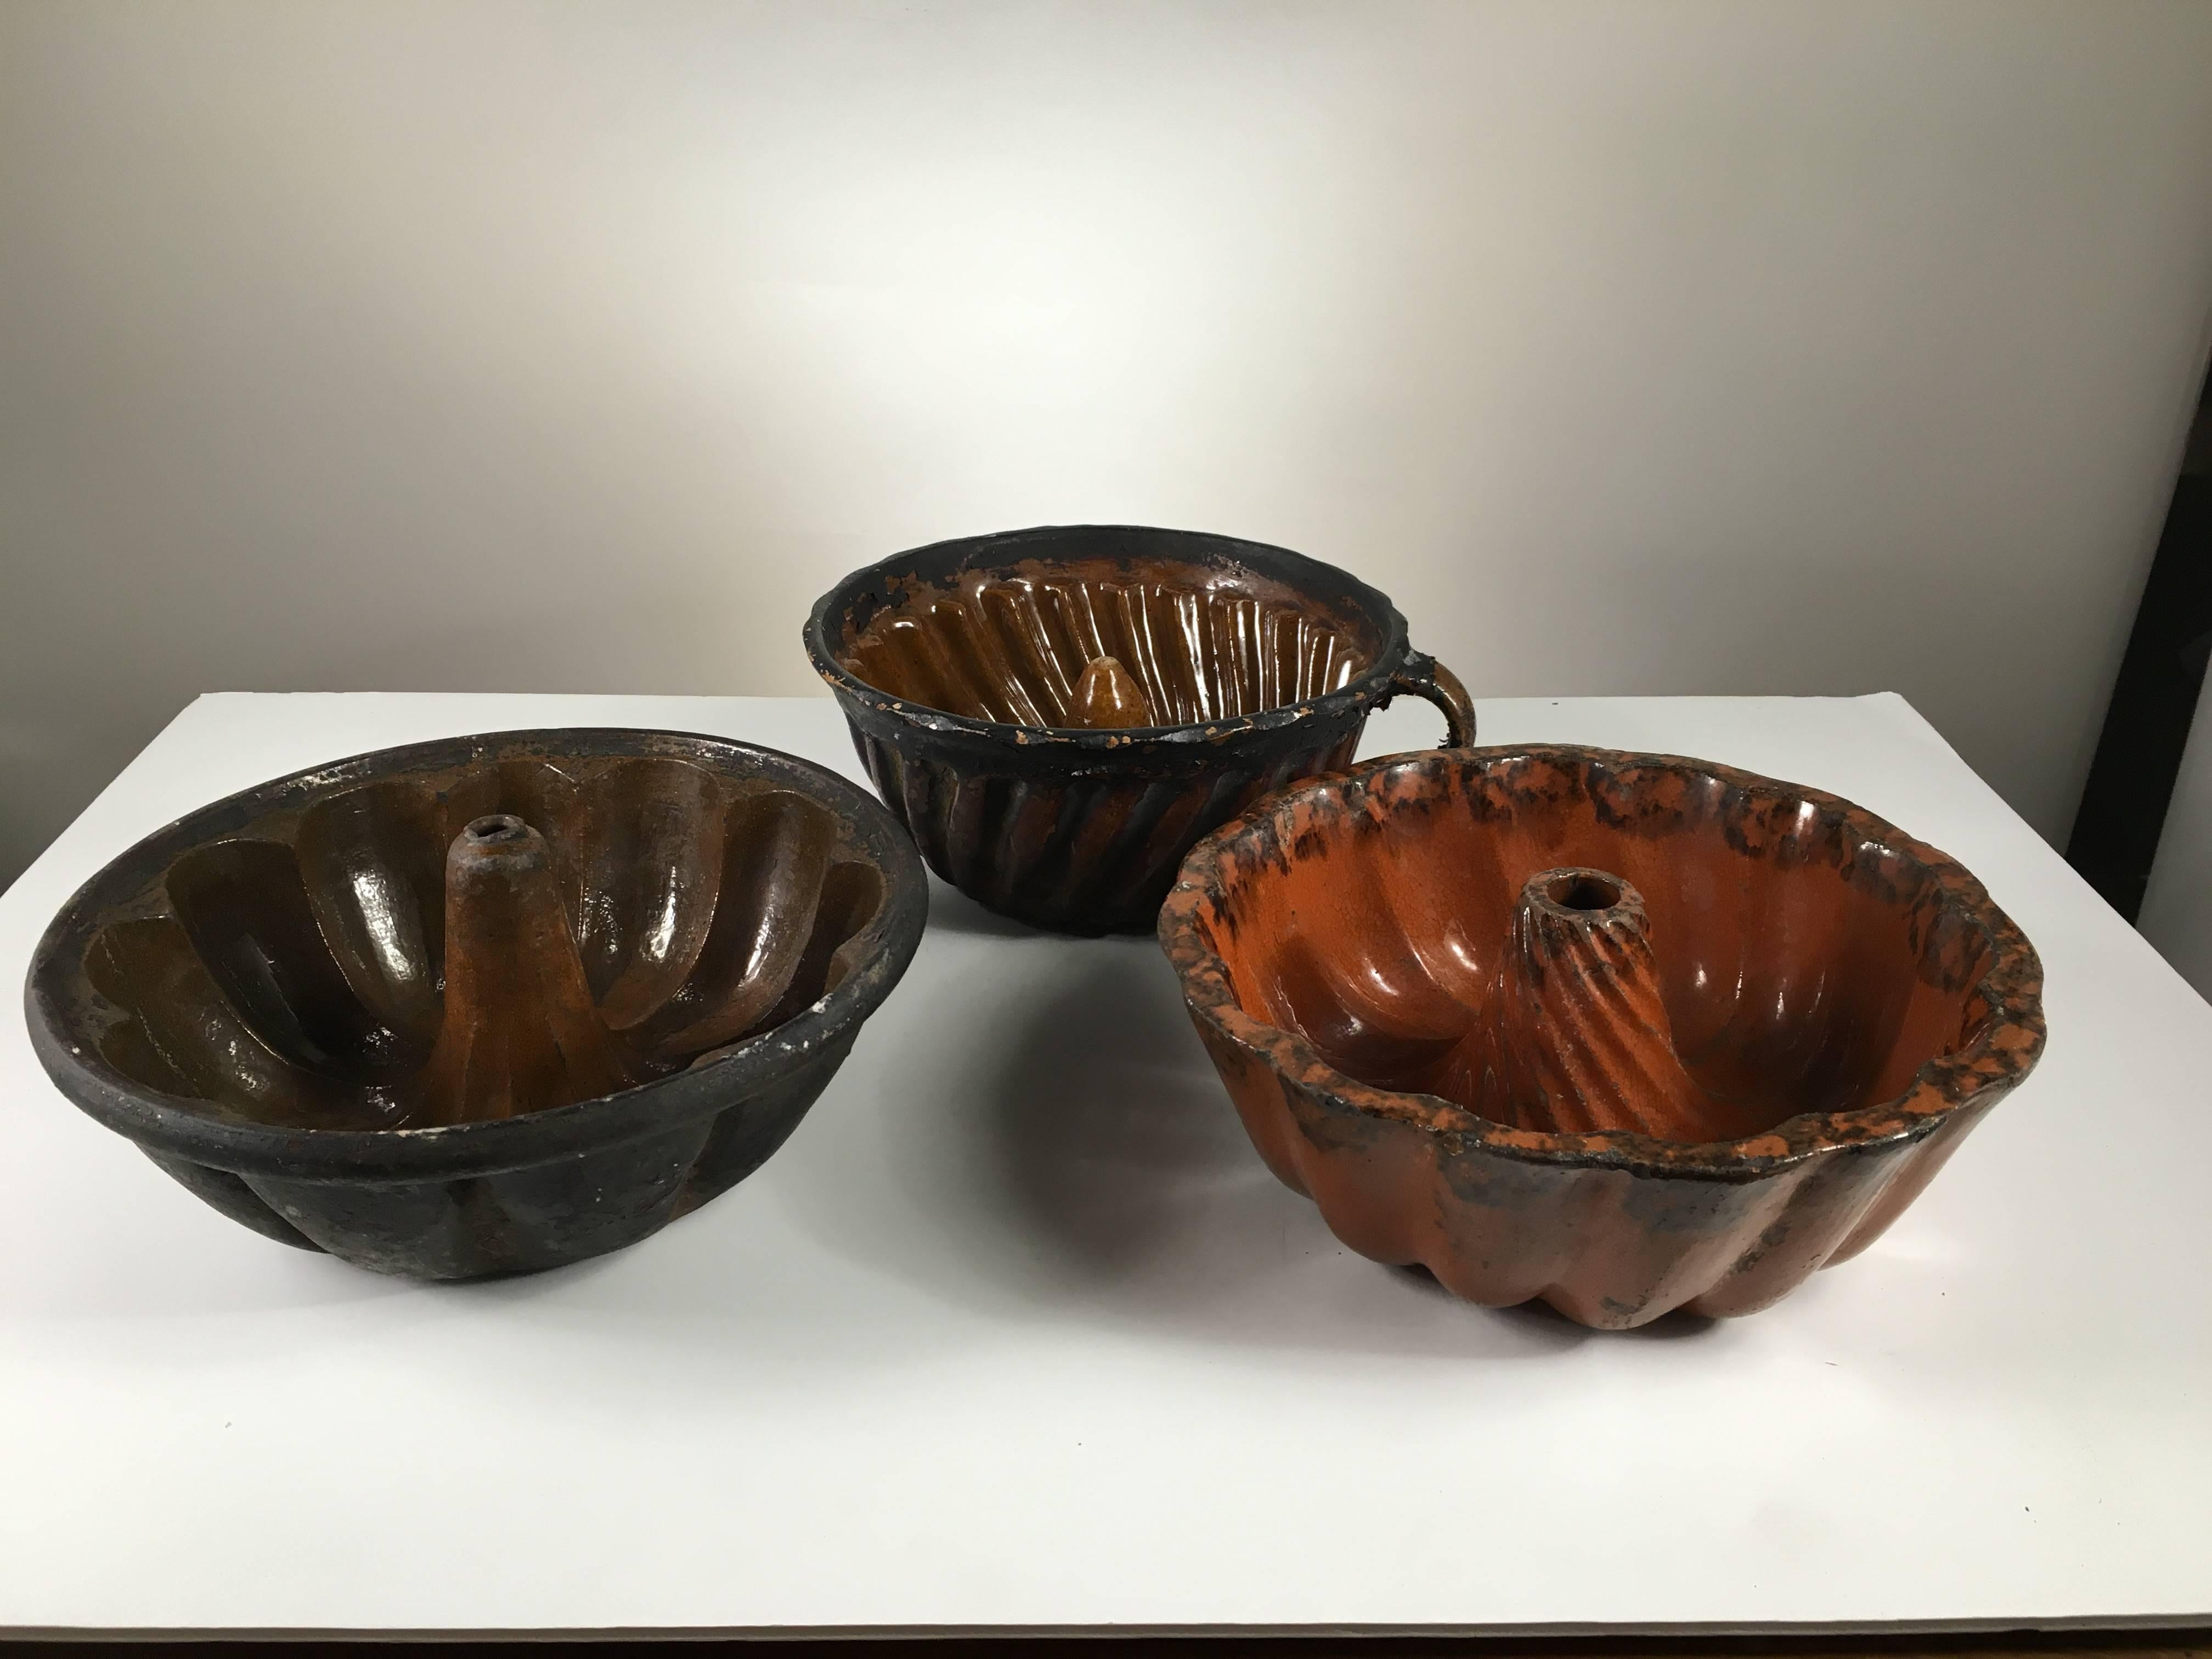 Country Collection of Three Early Pennsylvania Redware Cake Molds, 19th Century